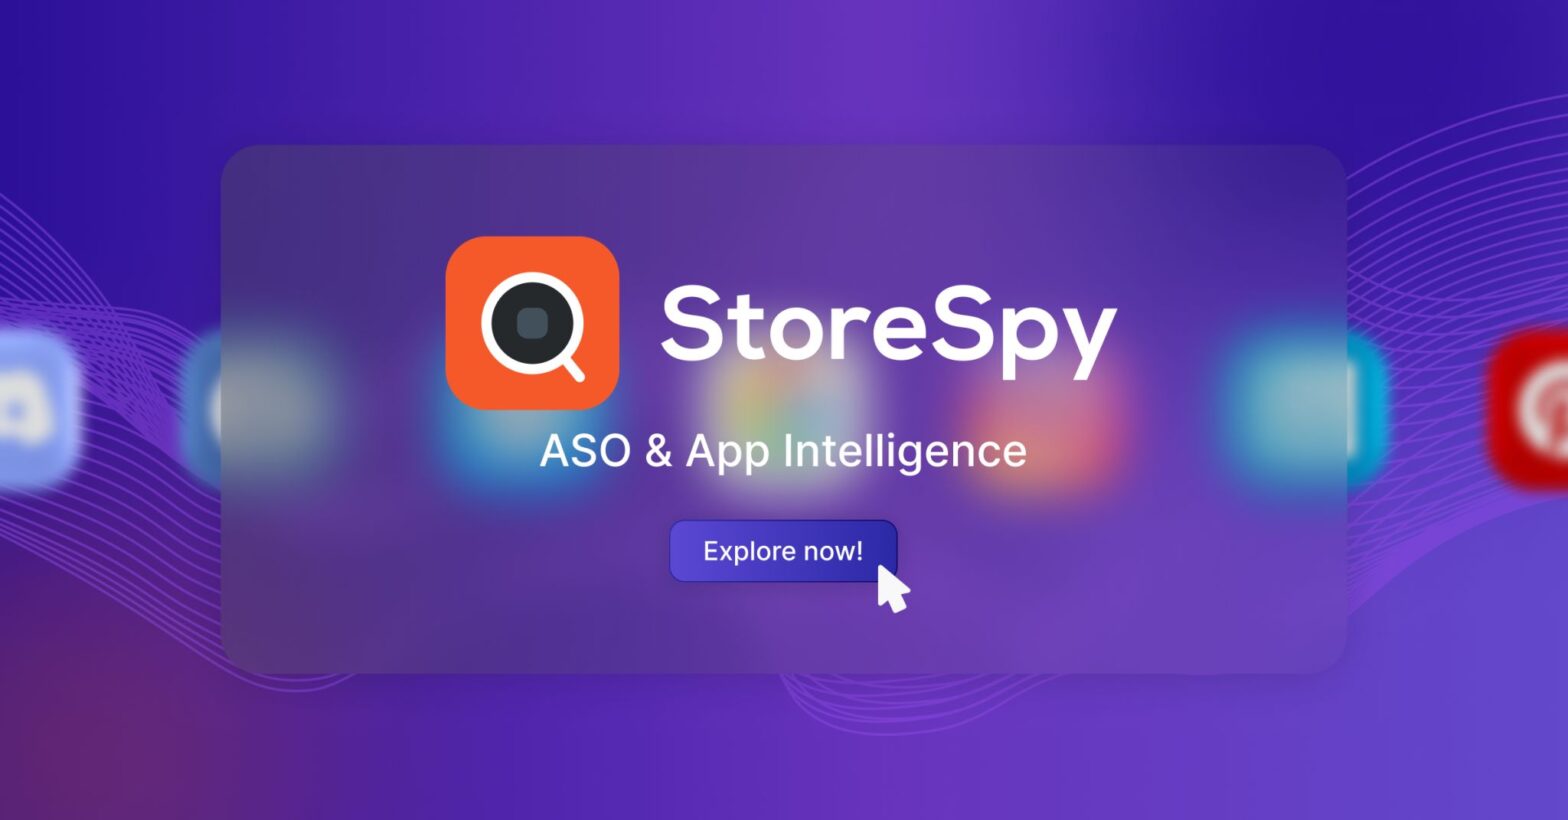 StoreSpy tools are out of beta testing